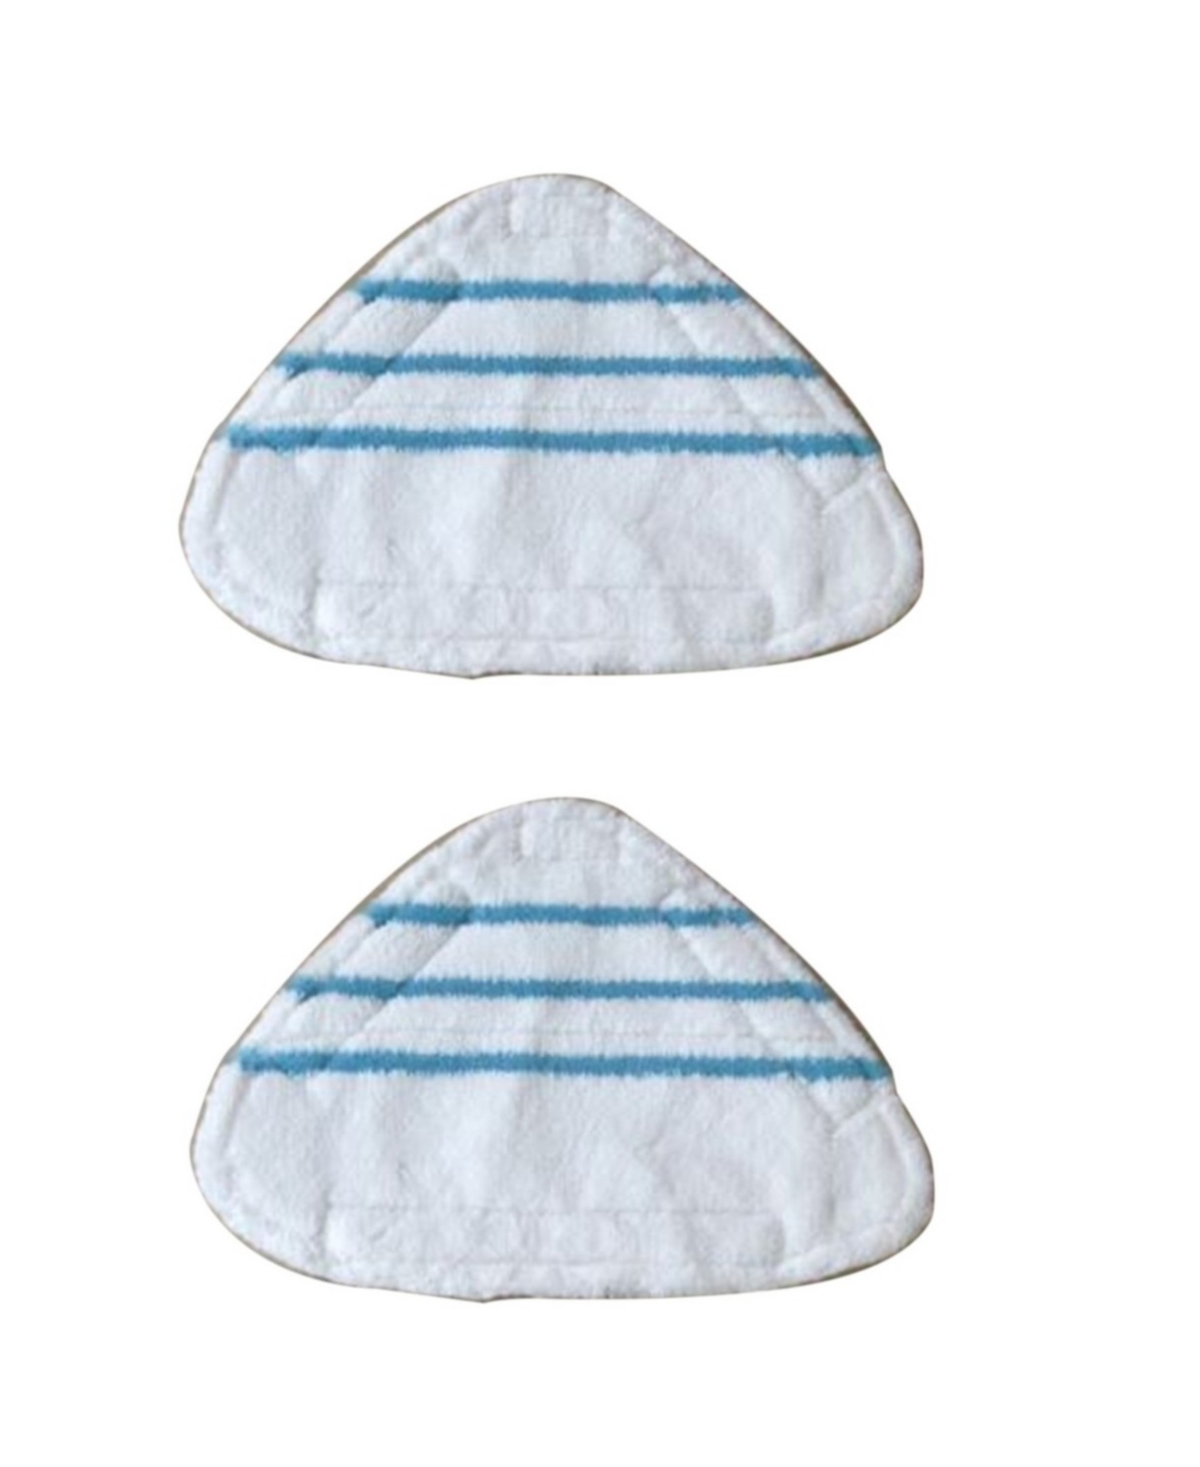 True & Tidy 2-piece Mop Pad Replacement For Stm-500 Steam Mop And Stm-700 Steam Mop And Handheld Steamer In White